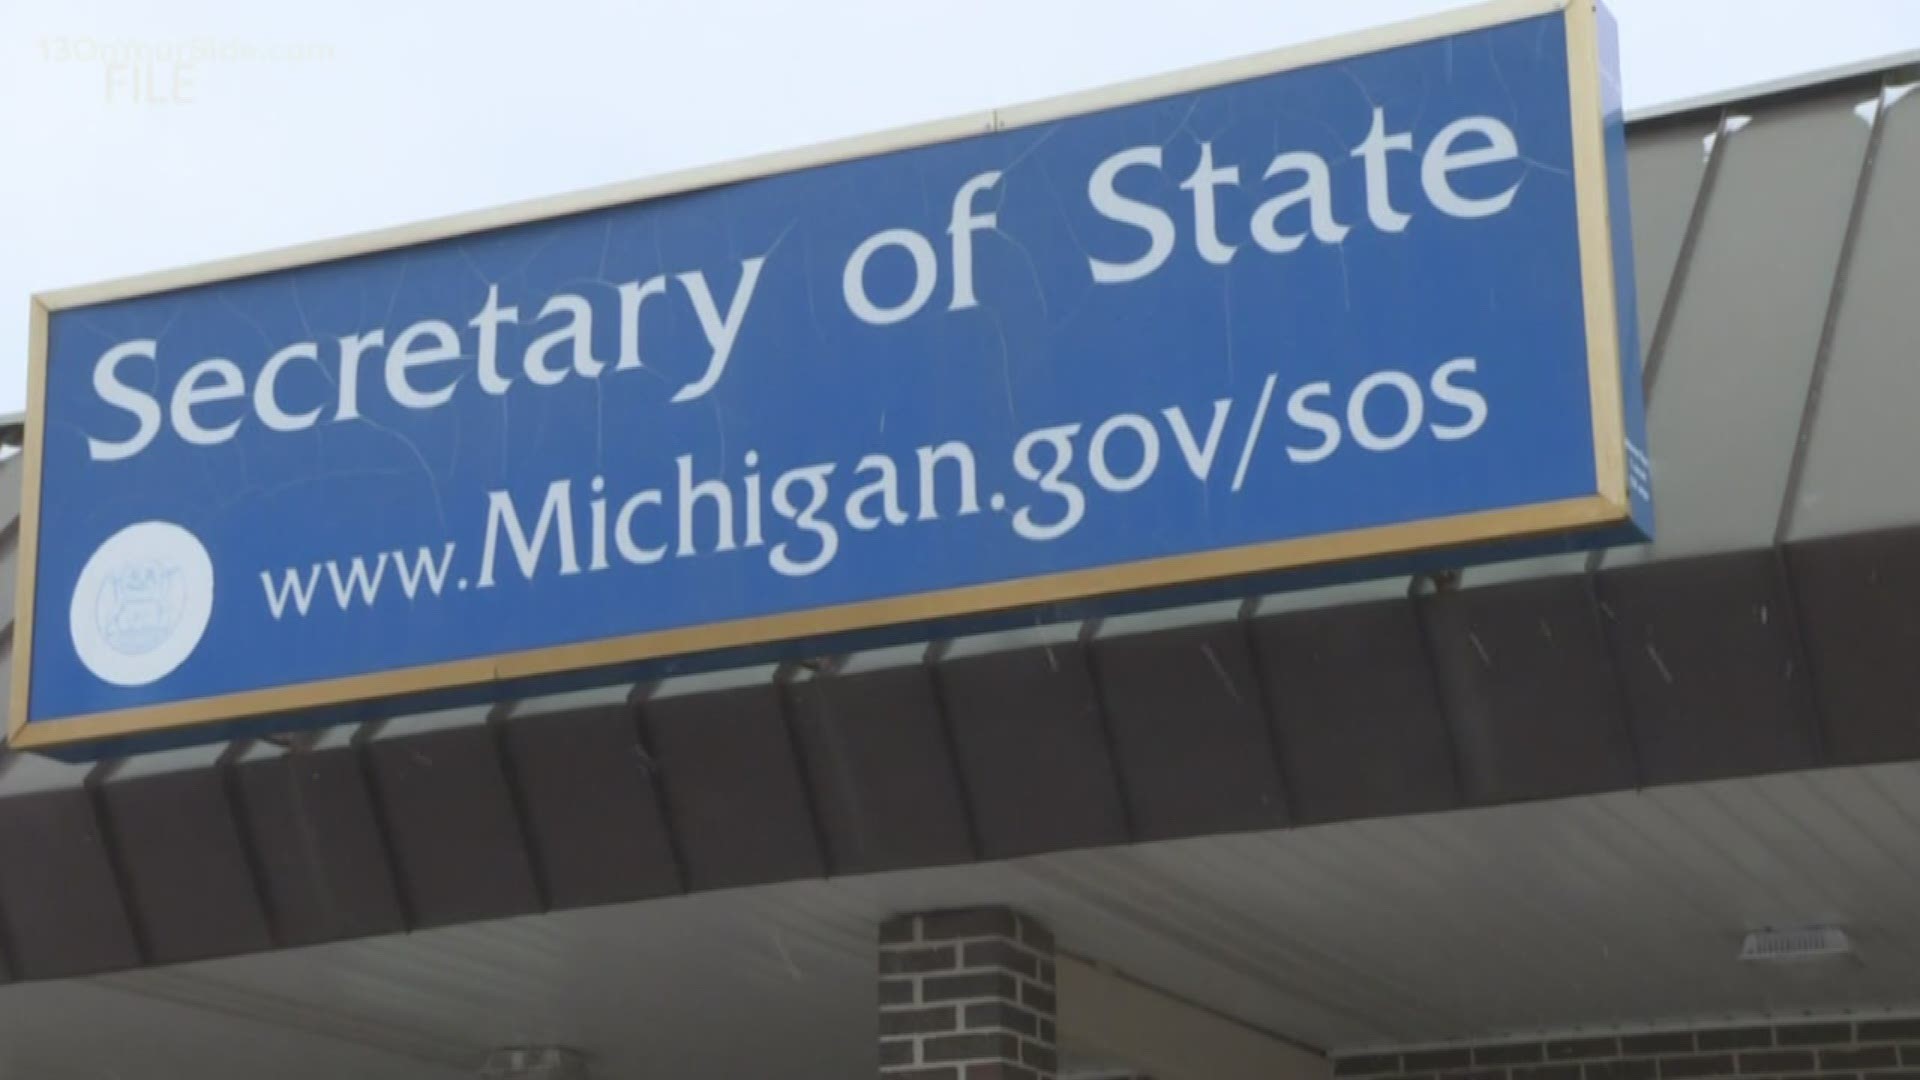 As part of Gov. Gretchen Whitmer's stay at home executive order, all Secretary of State branches will close through April 13.